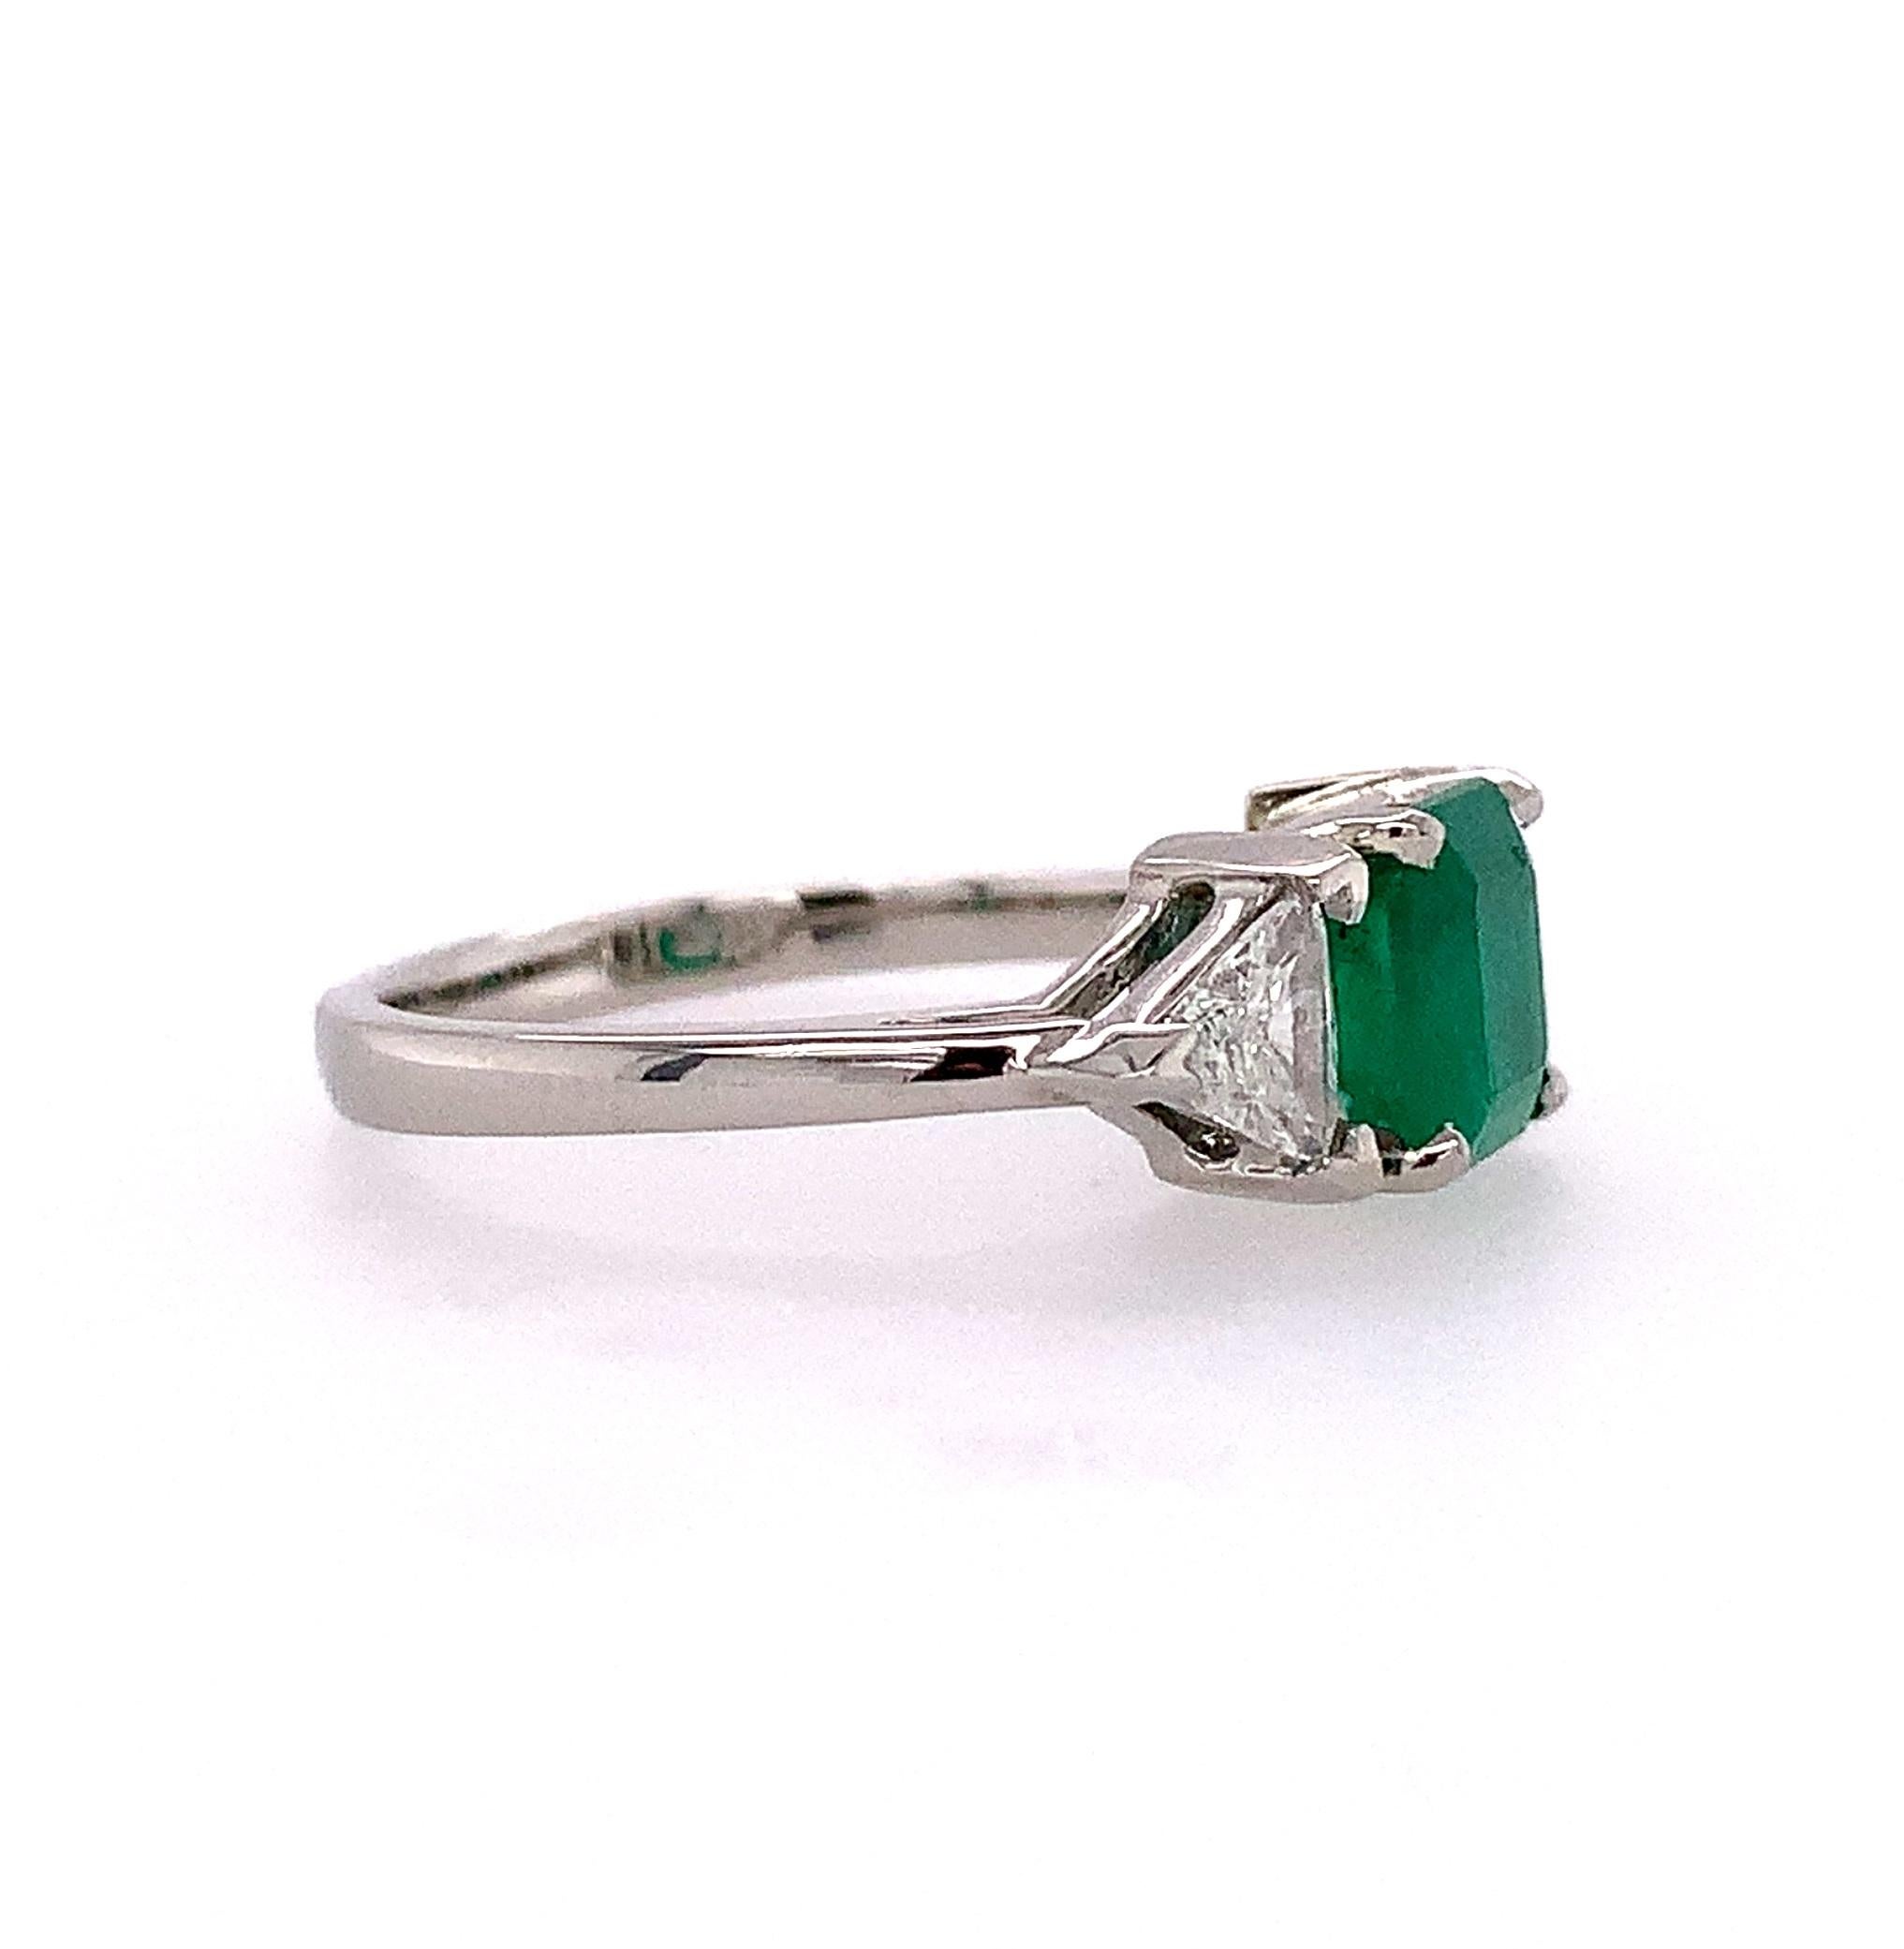  Platinum emerald & diamond ring featuring a genuine earth mined emerald cut emerald weighing 1.30 carats. The emerald has A report from the Colombian Gem Lab stating natural Emerald from Colombia. The emerald has bright grass green color and